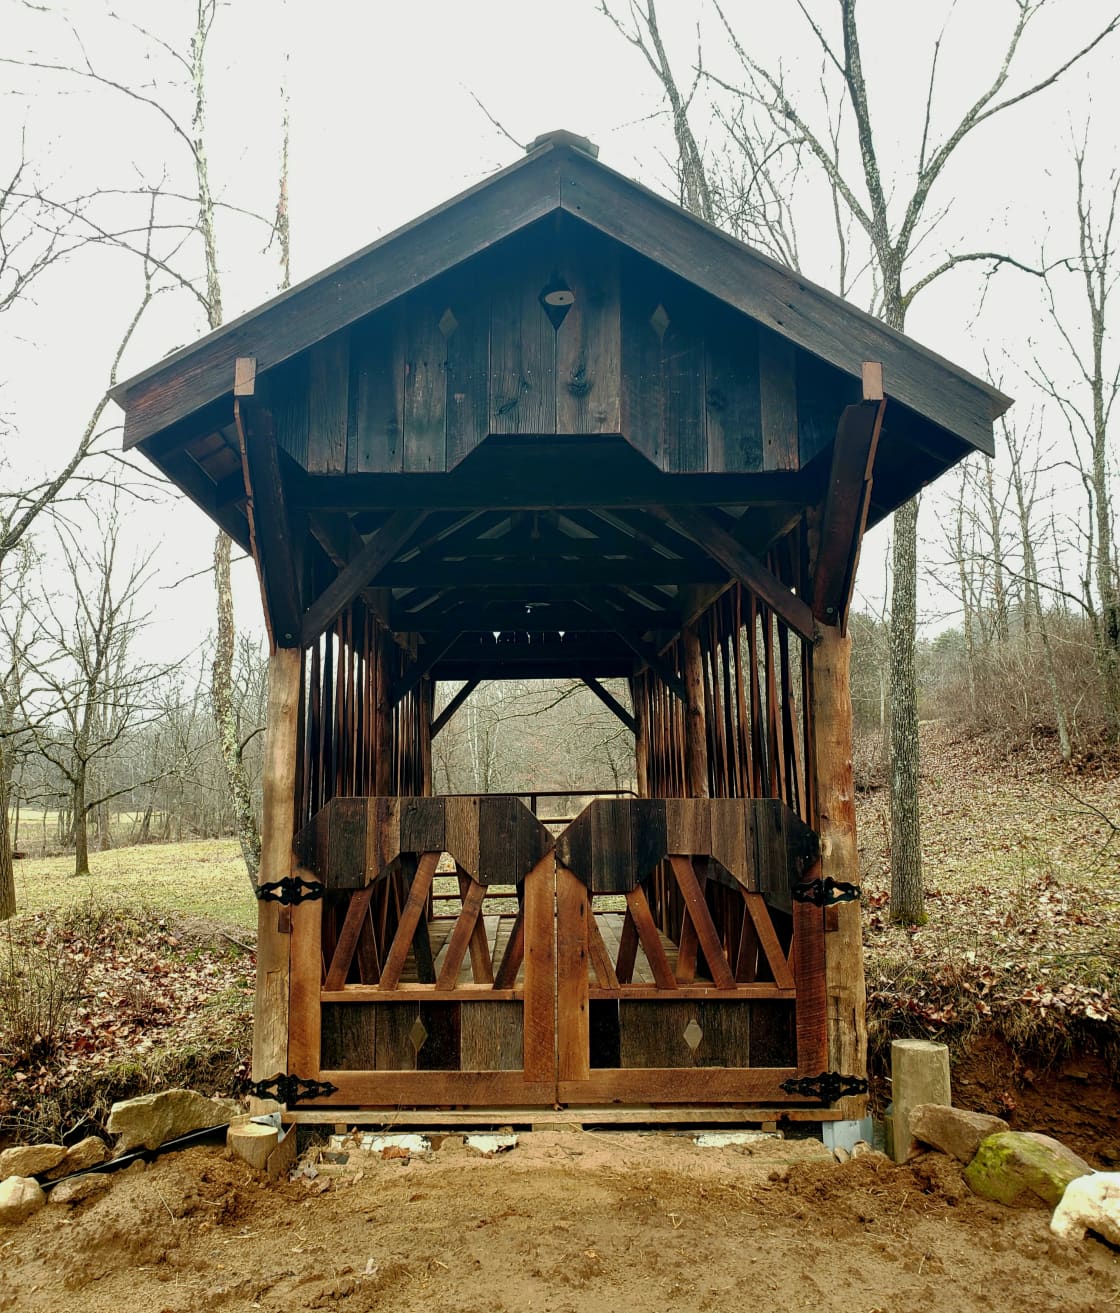 The historic restored covered bridge that brings you across the creek from the parking area to the camping area. Also perfect for photo shoots and weddings/ceremonies.